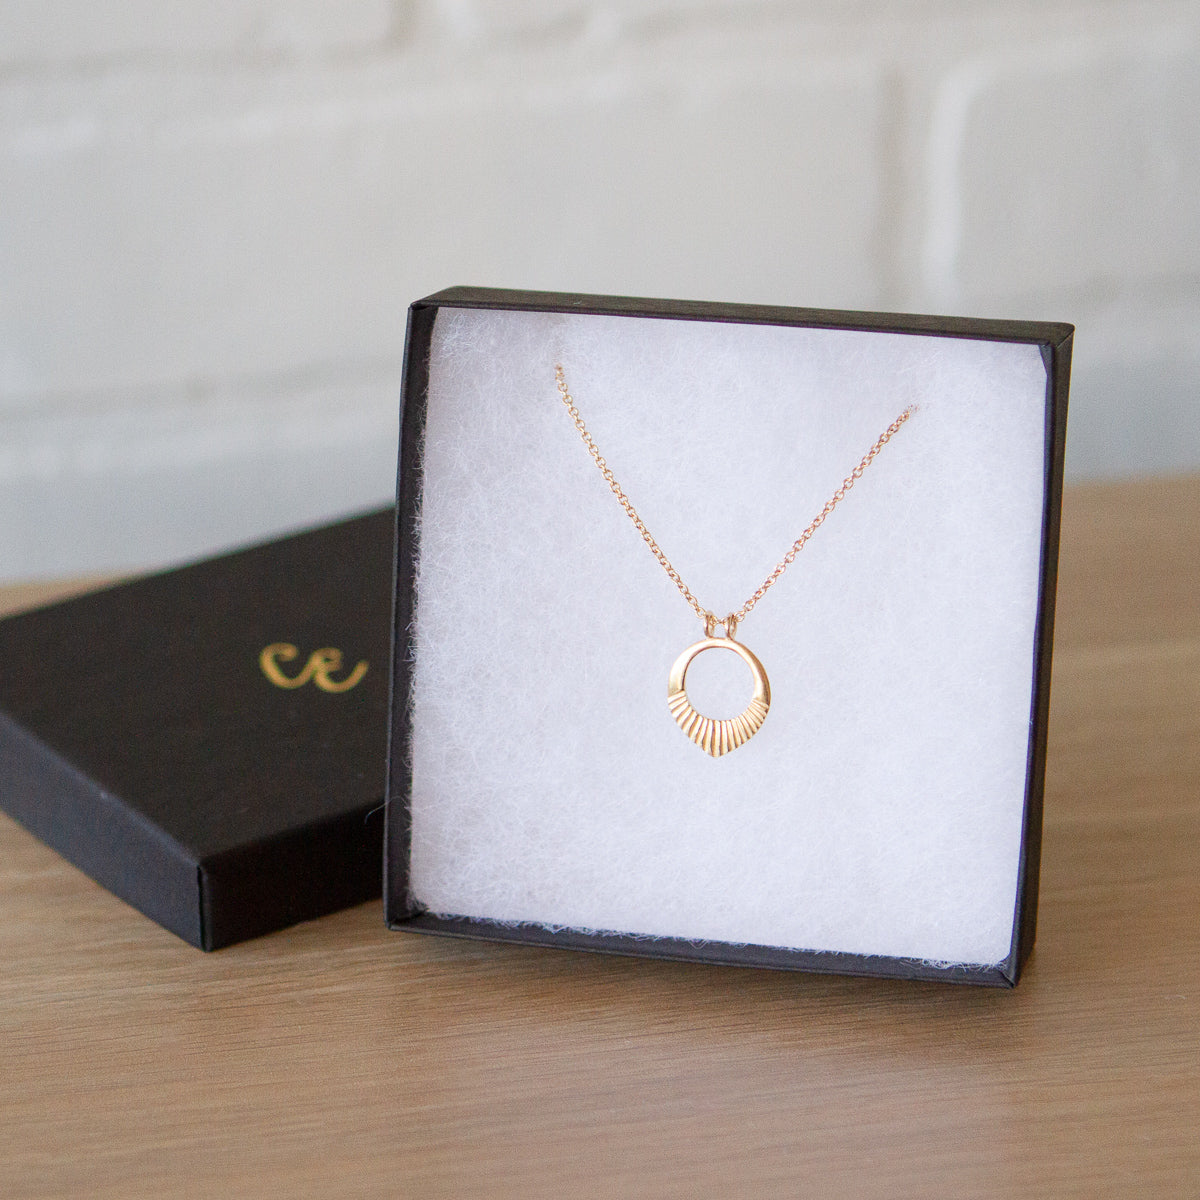 Small vermeil open petal shape necklace with carved rays across the bottom in a gift box